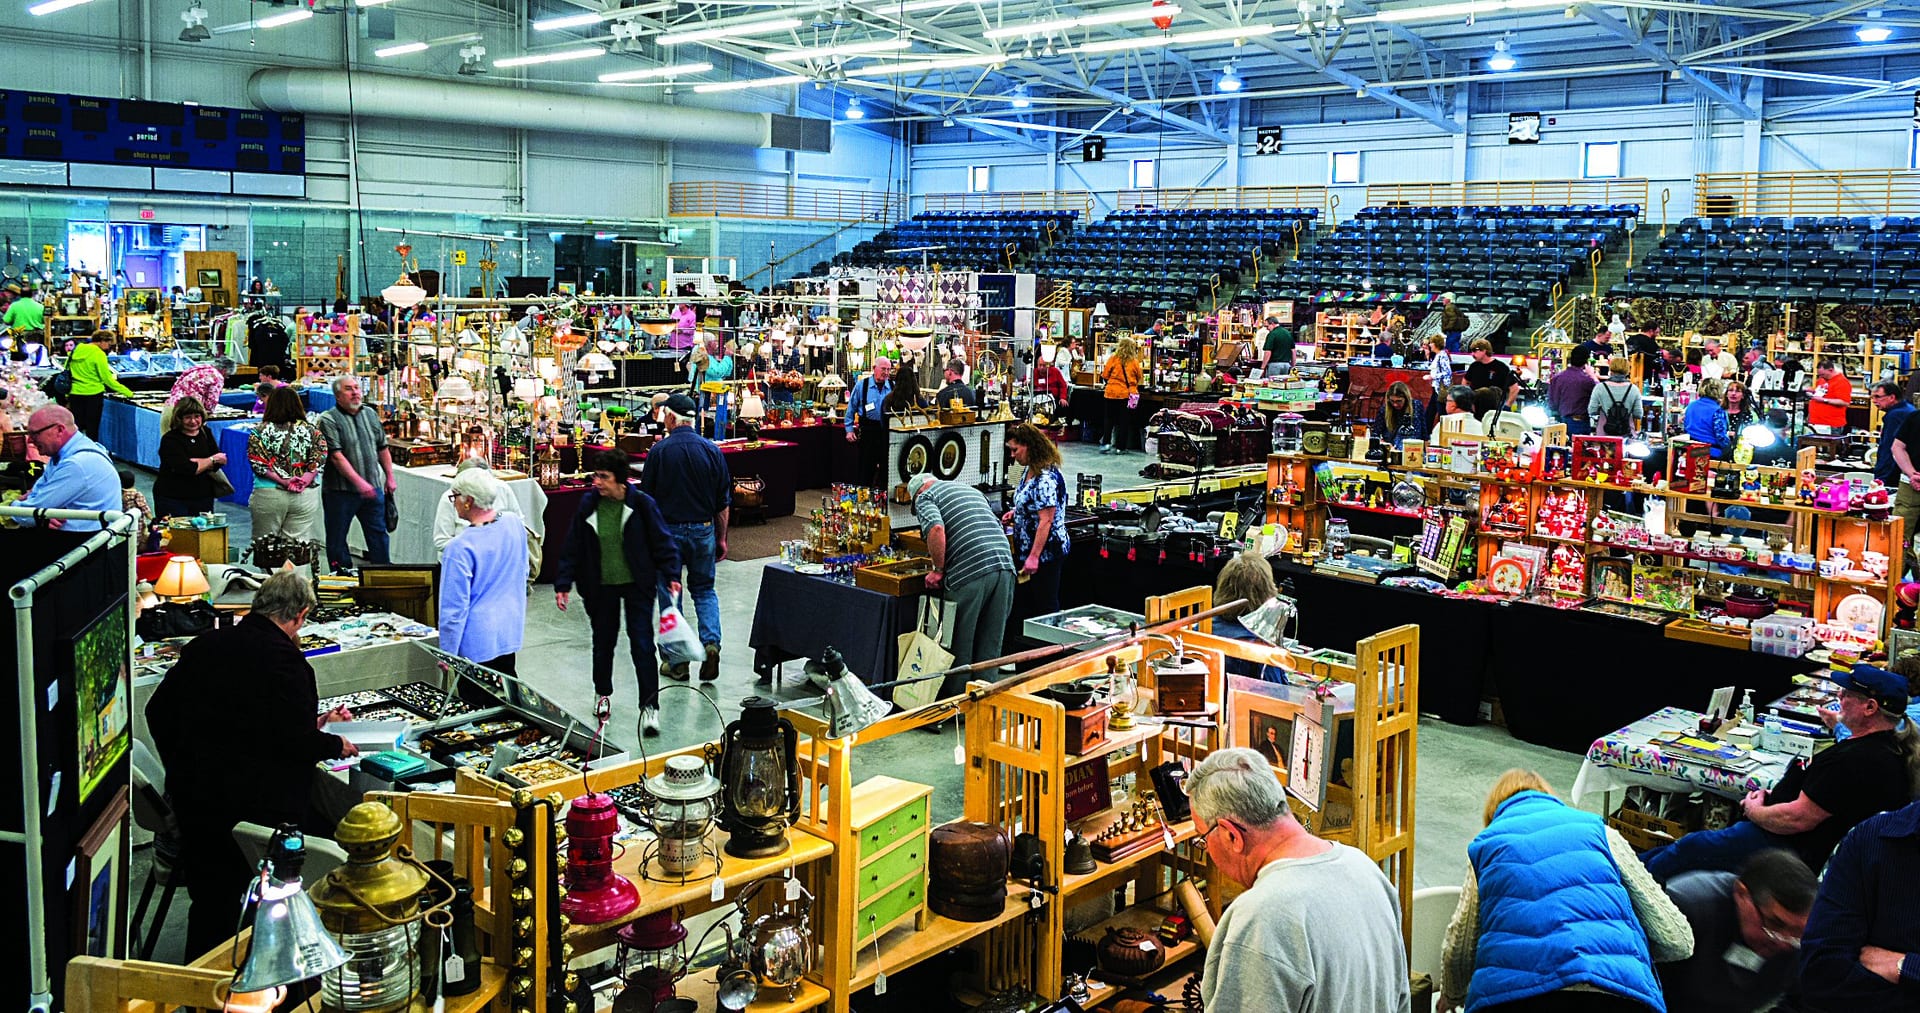 Million Dollar Antique Show at the Ice Center April 20-22